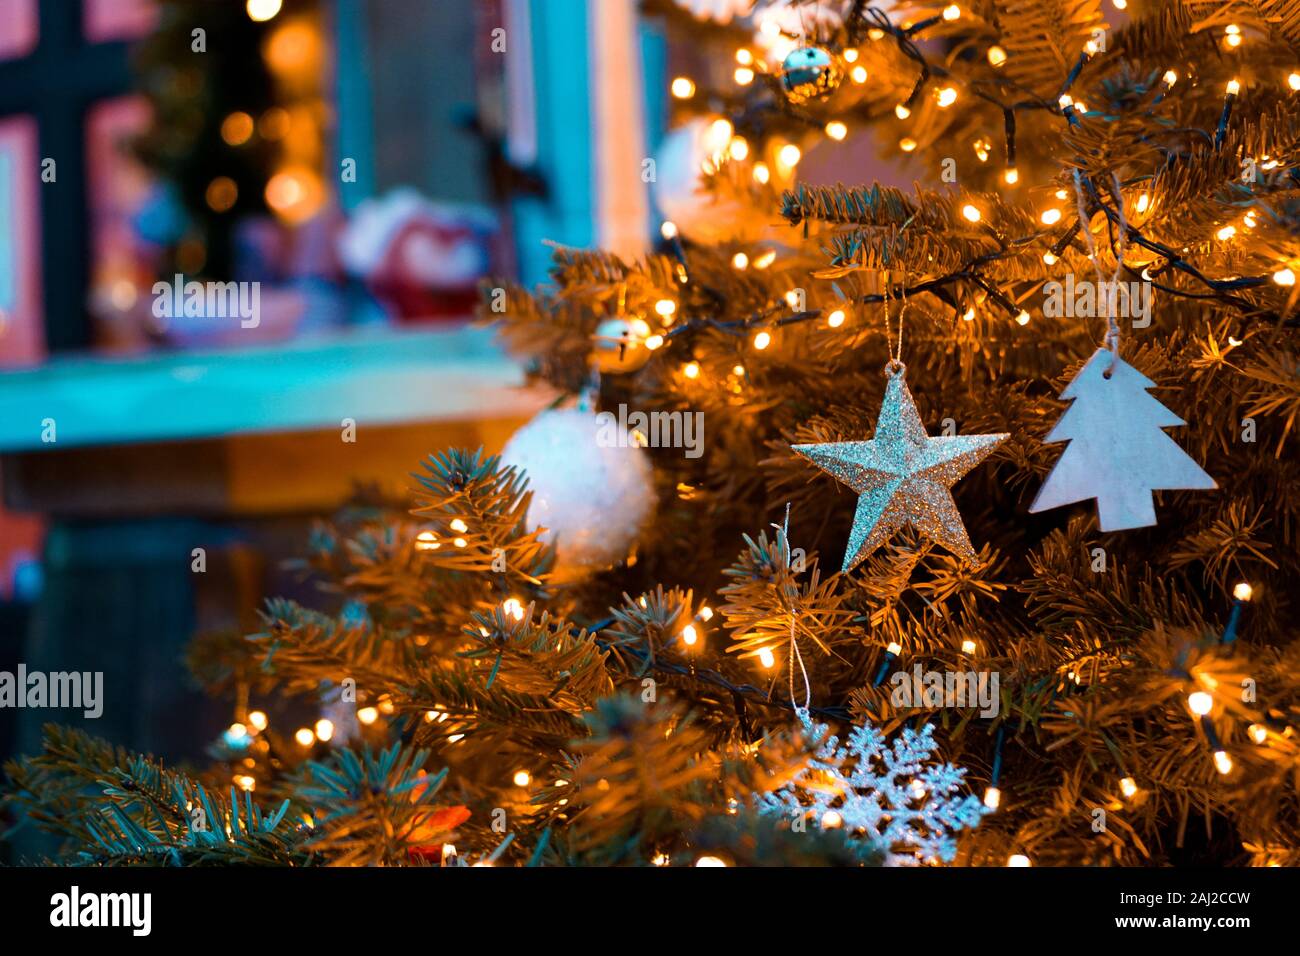 Gold Christmas tree with toys - background of de-focused lights Stock Photo  - Alamy